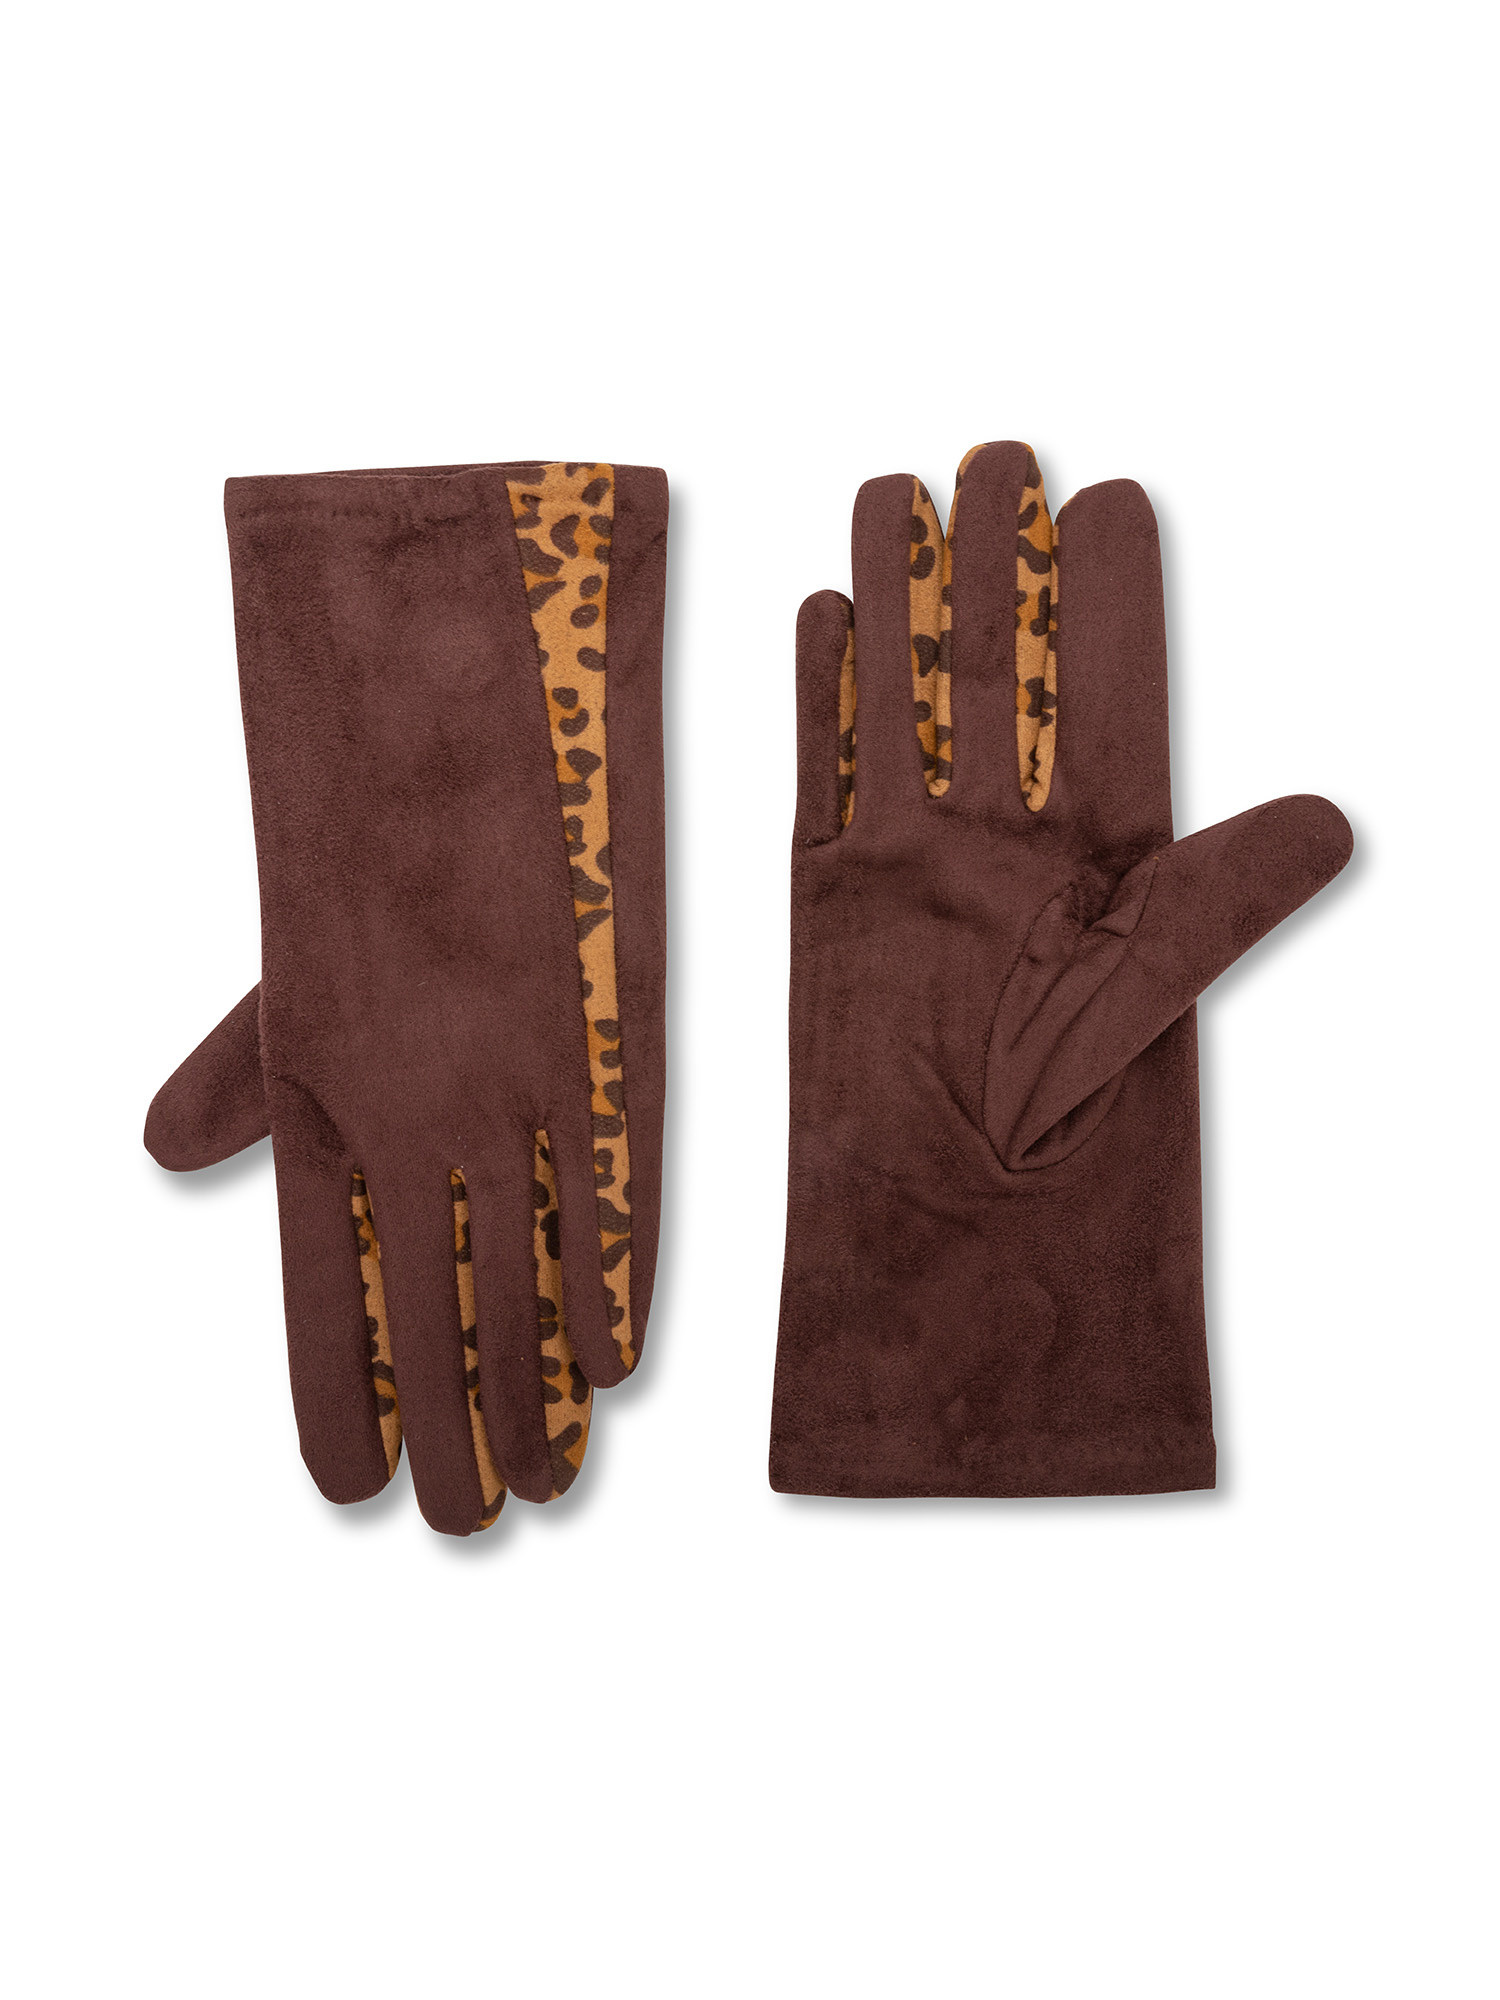 Koan - Gloves with animalier inserts, Brown, large image number 0